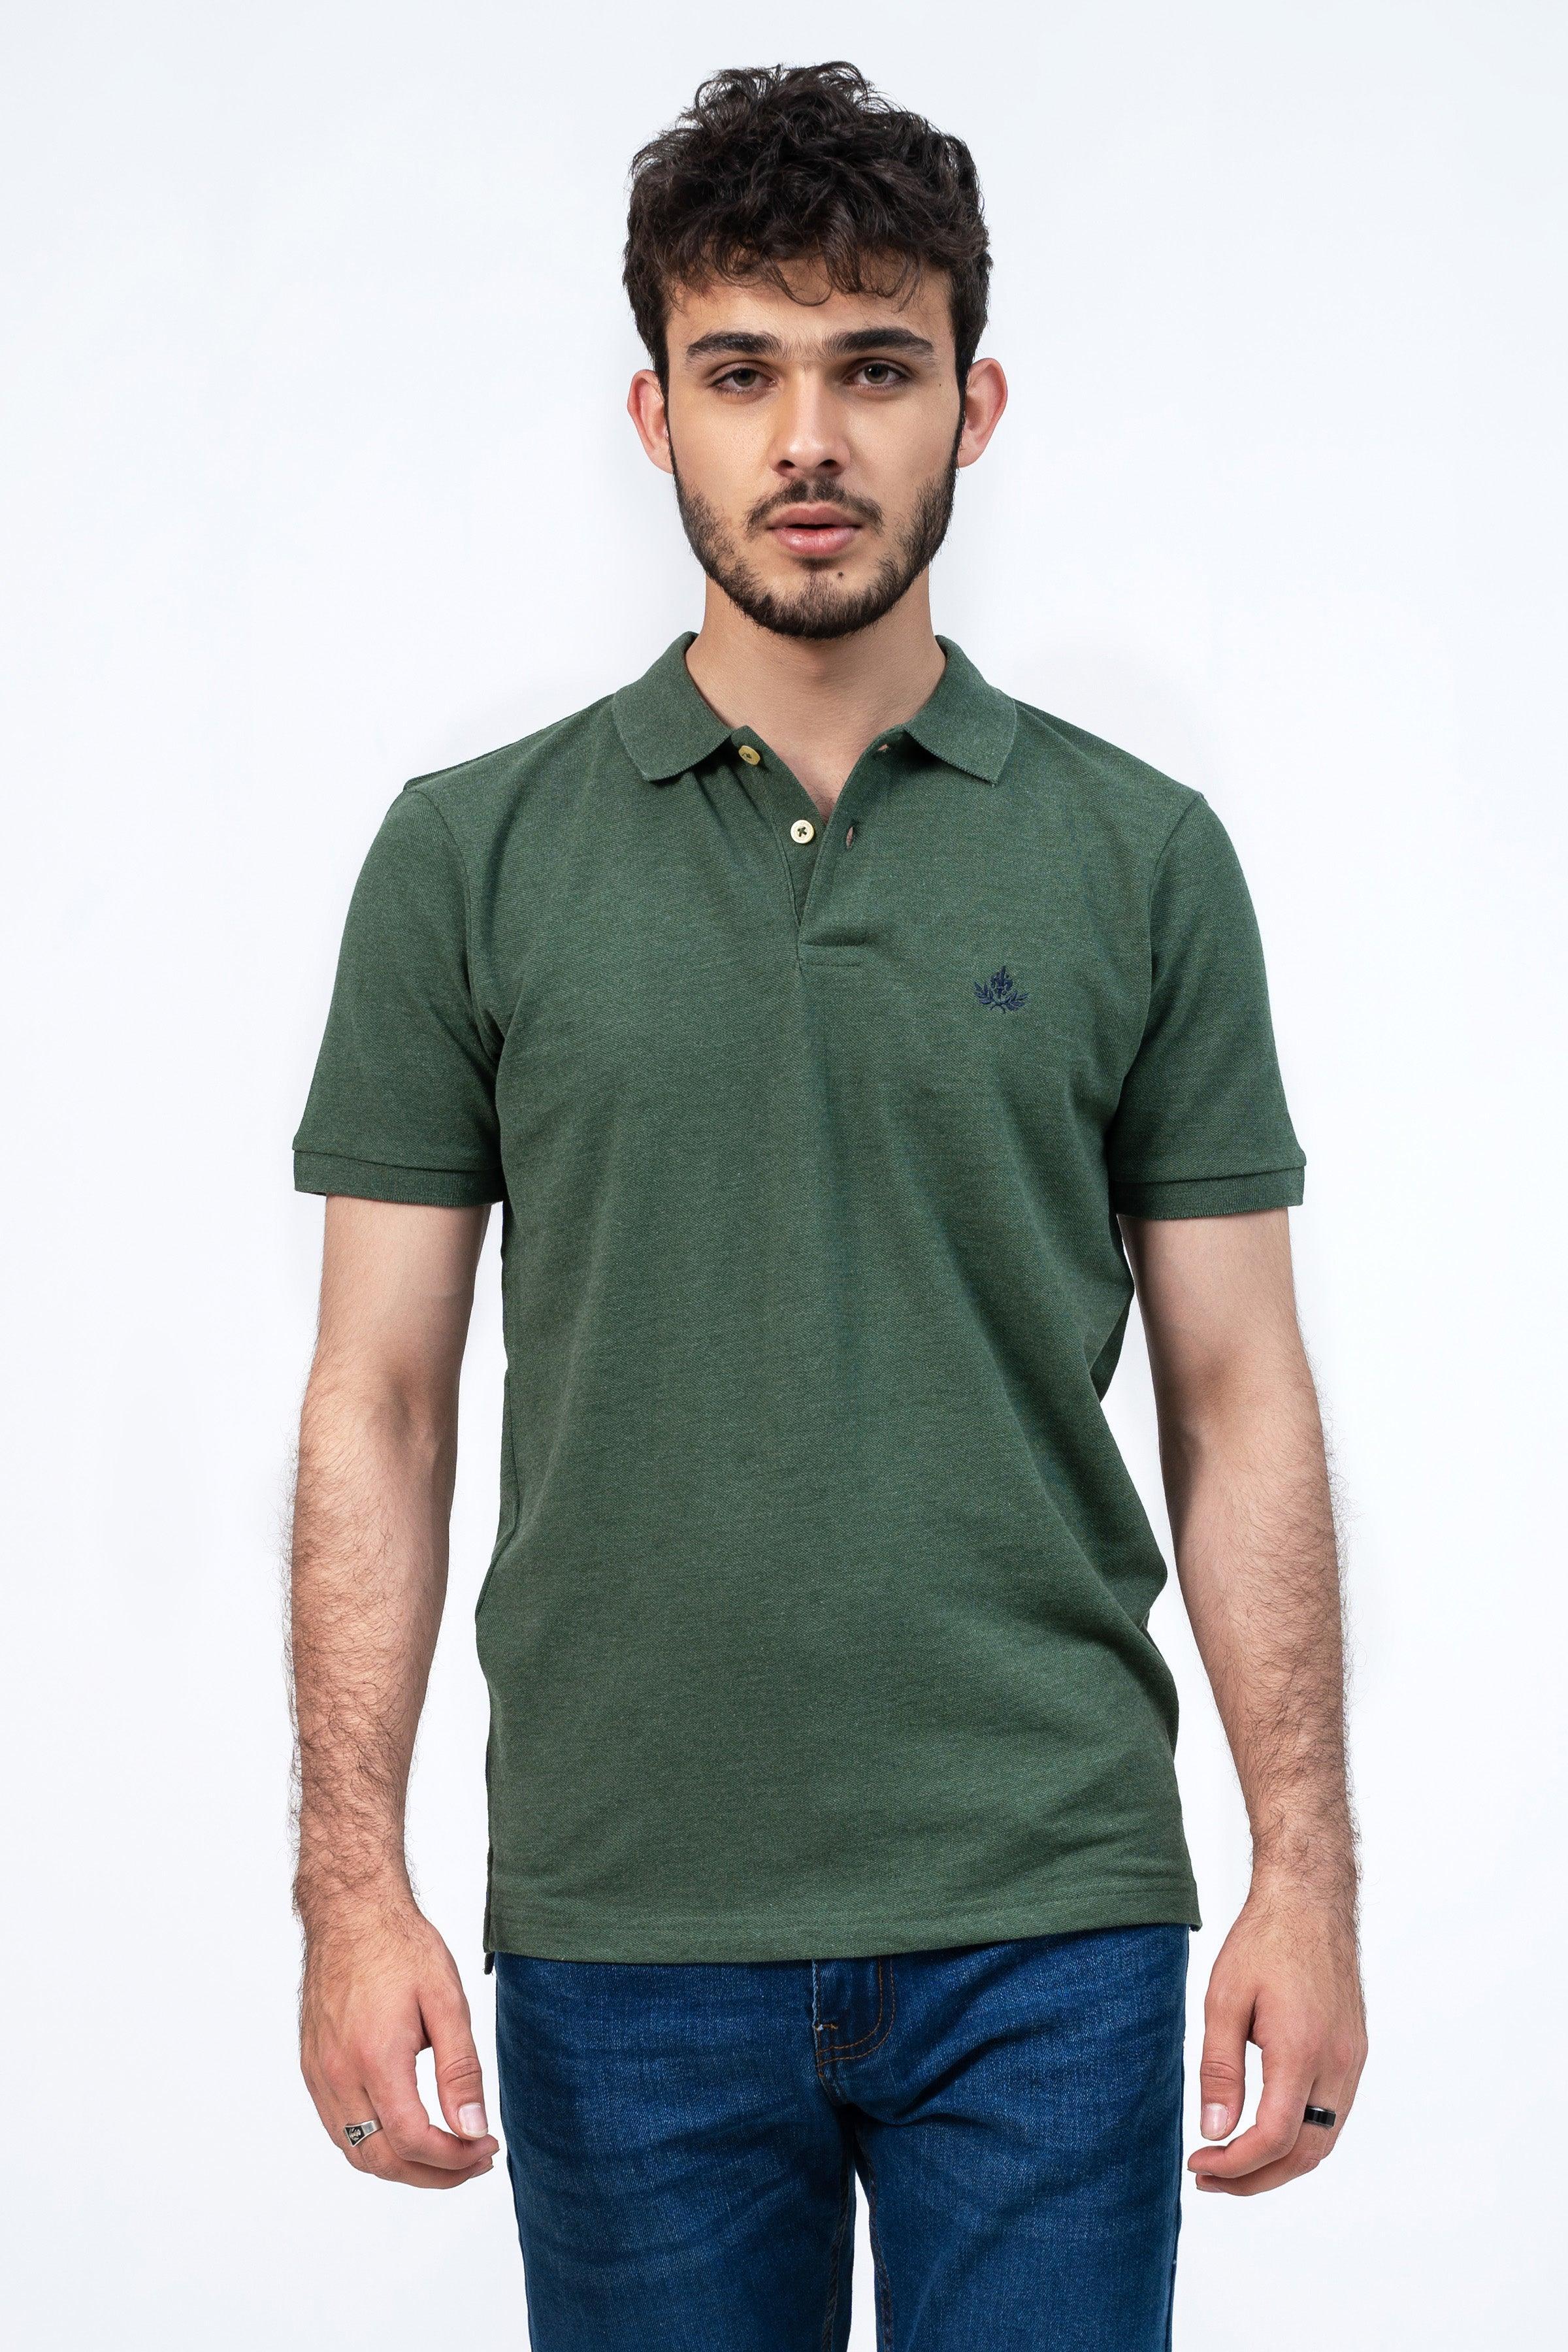 CLASSIC GREEN POLO at Charcoal Clothing